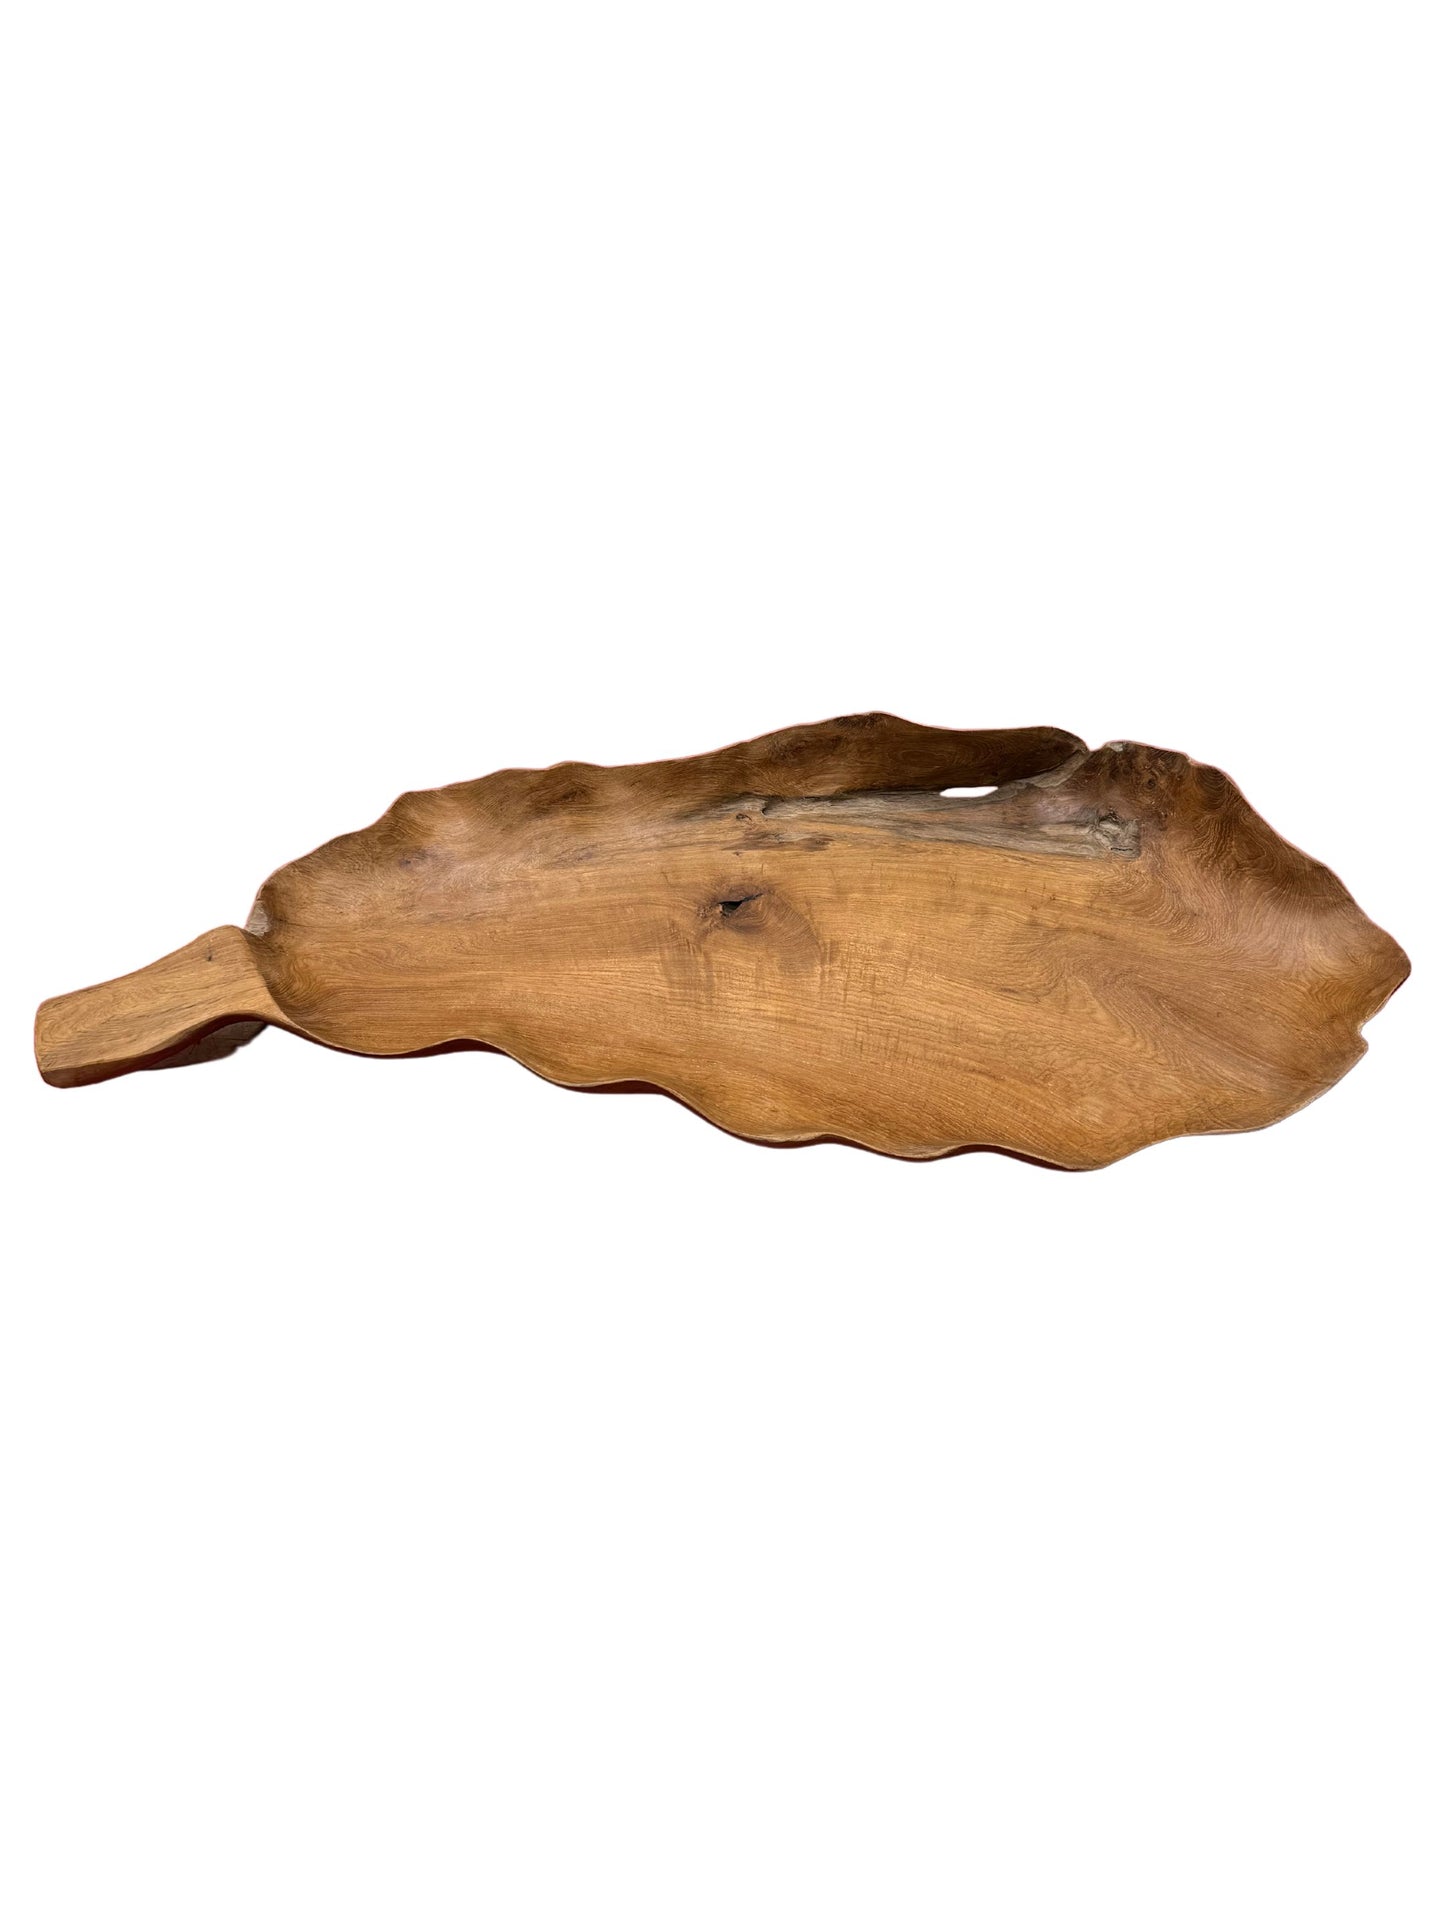 Eclectic Home Accent Teak Leaf Plate  Wooden  Decor Furniture